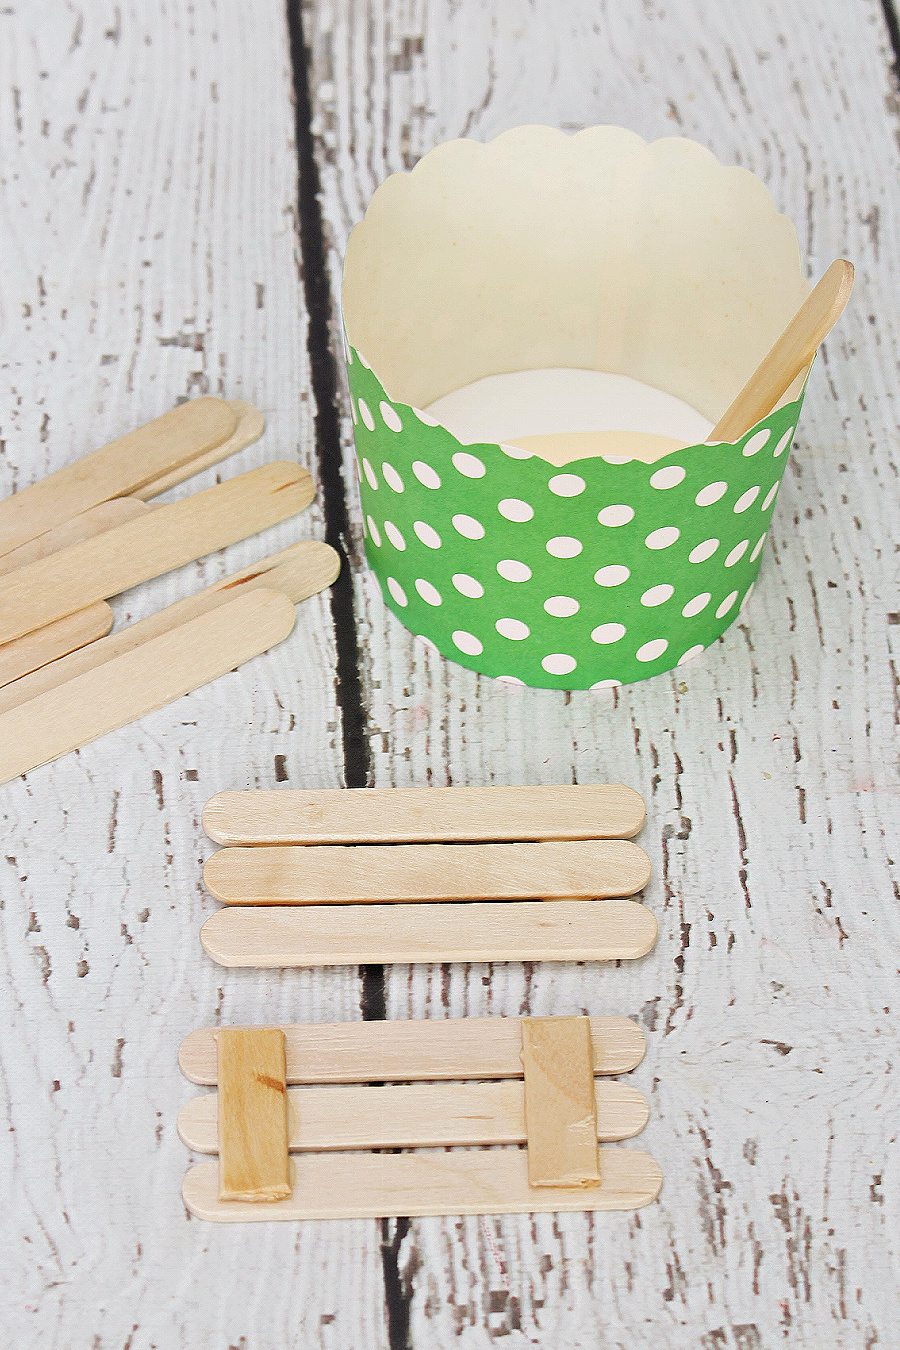 Step by step tutorial to make a popsicle stick picnic table.